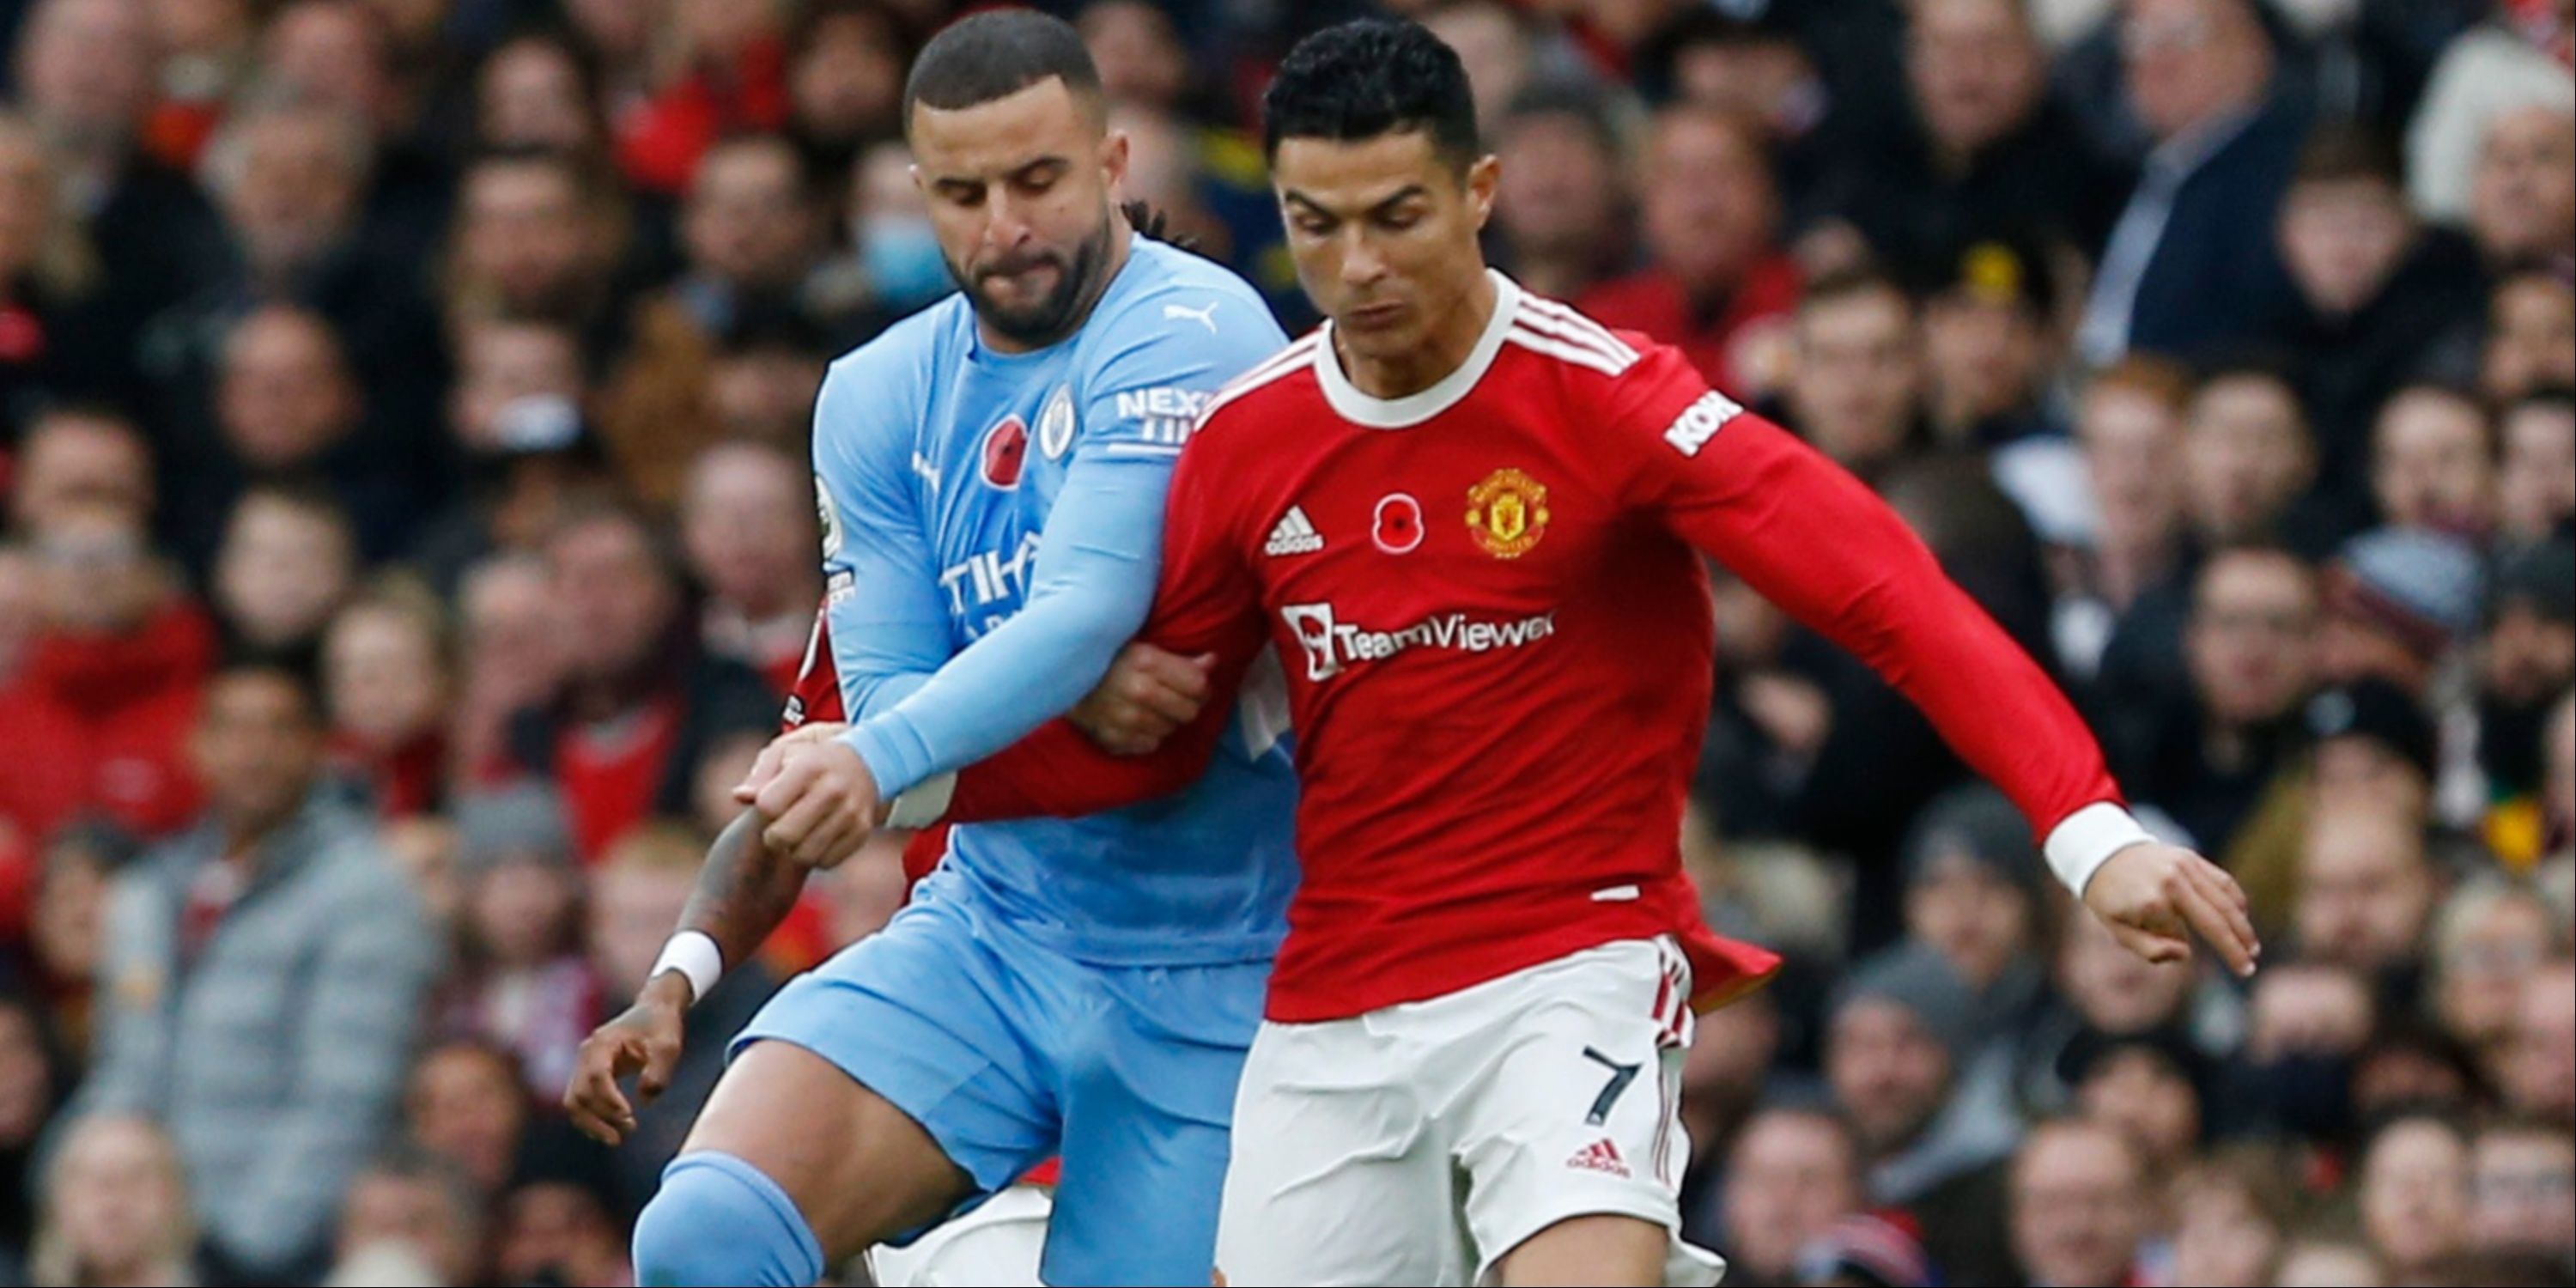 Manchester City's Kyle Walker in action with Manchester United's Cristiano Ronaldo